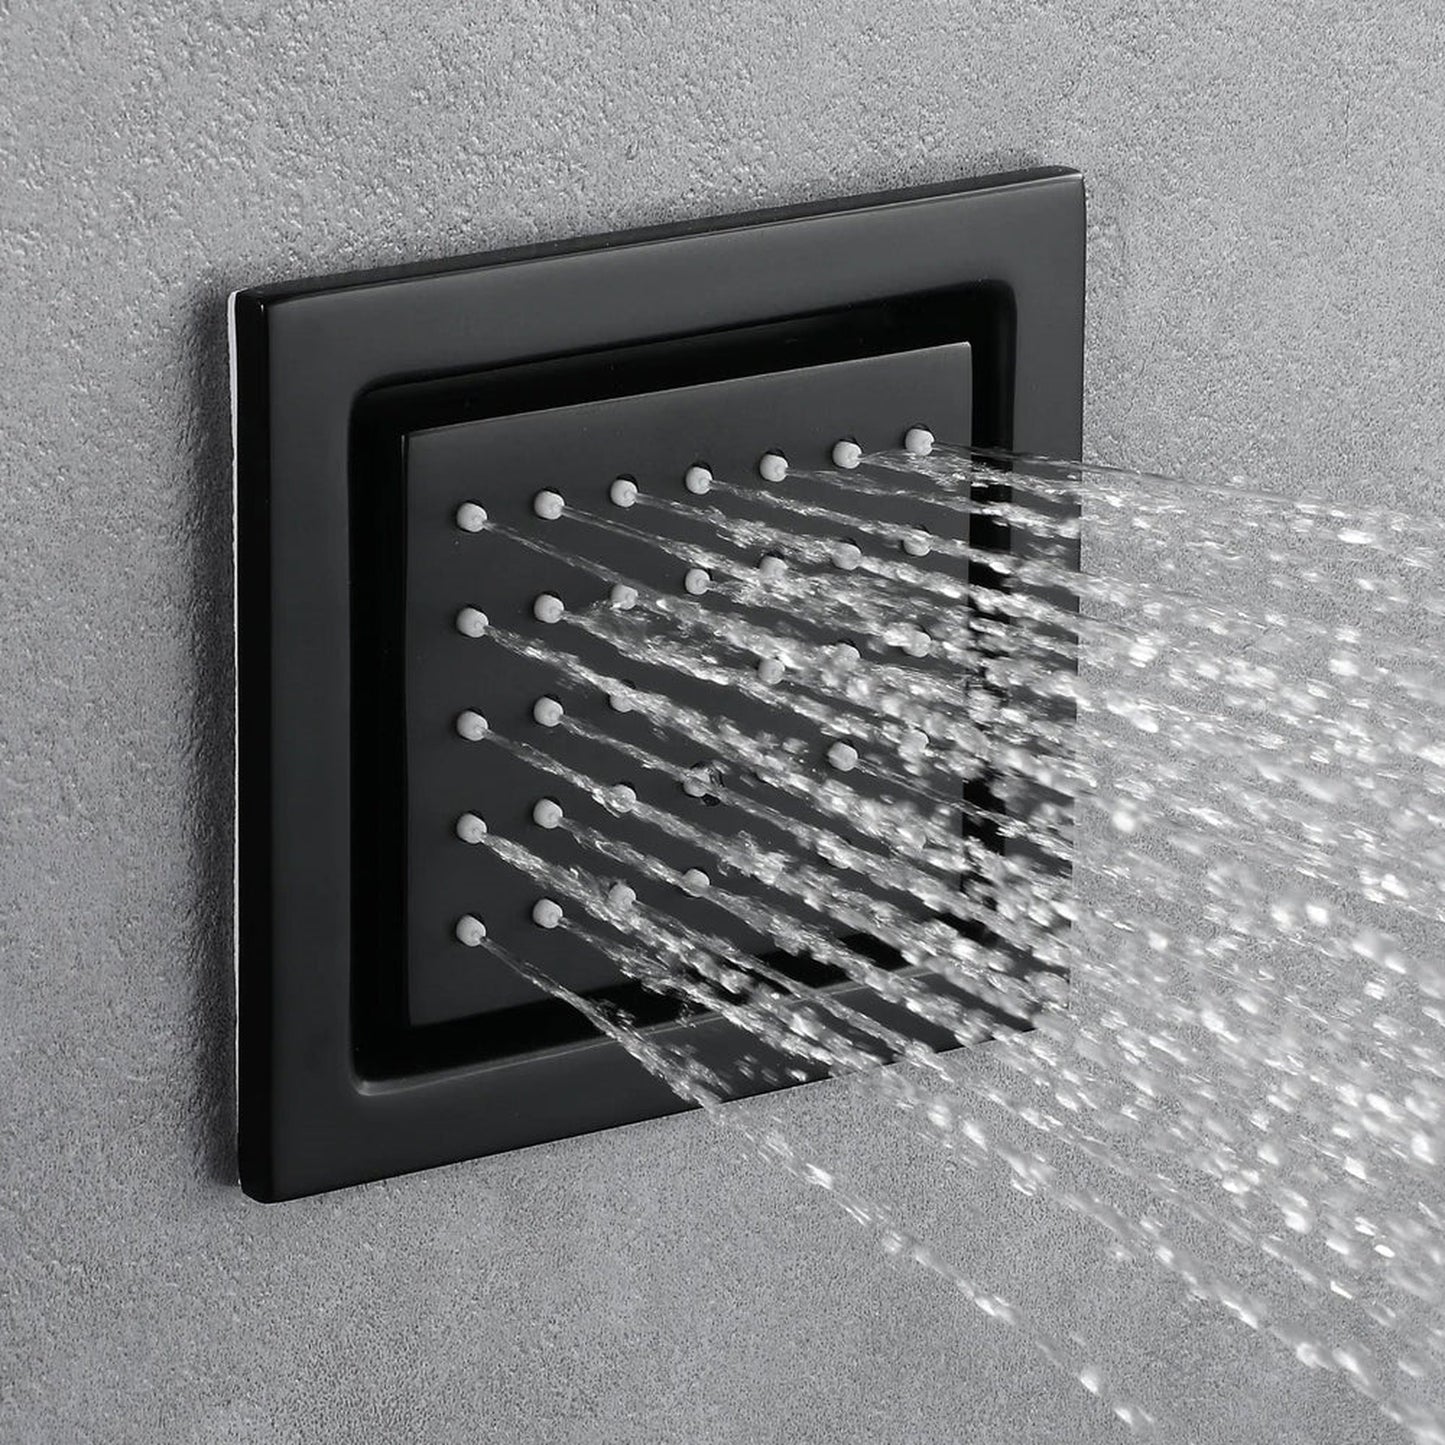 Fontana Cagliari Matte Black Recessed Ceiling Mounted Phone Controlled Thermostatic Musical LED Rainfall Shower System With 6-Jet Body Sprays and Hand Shower